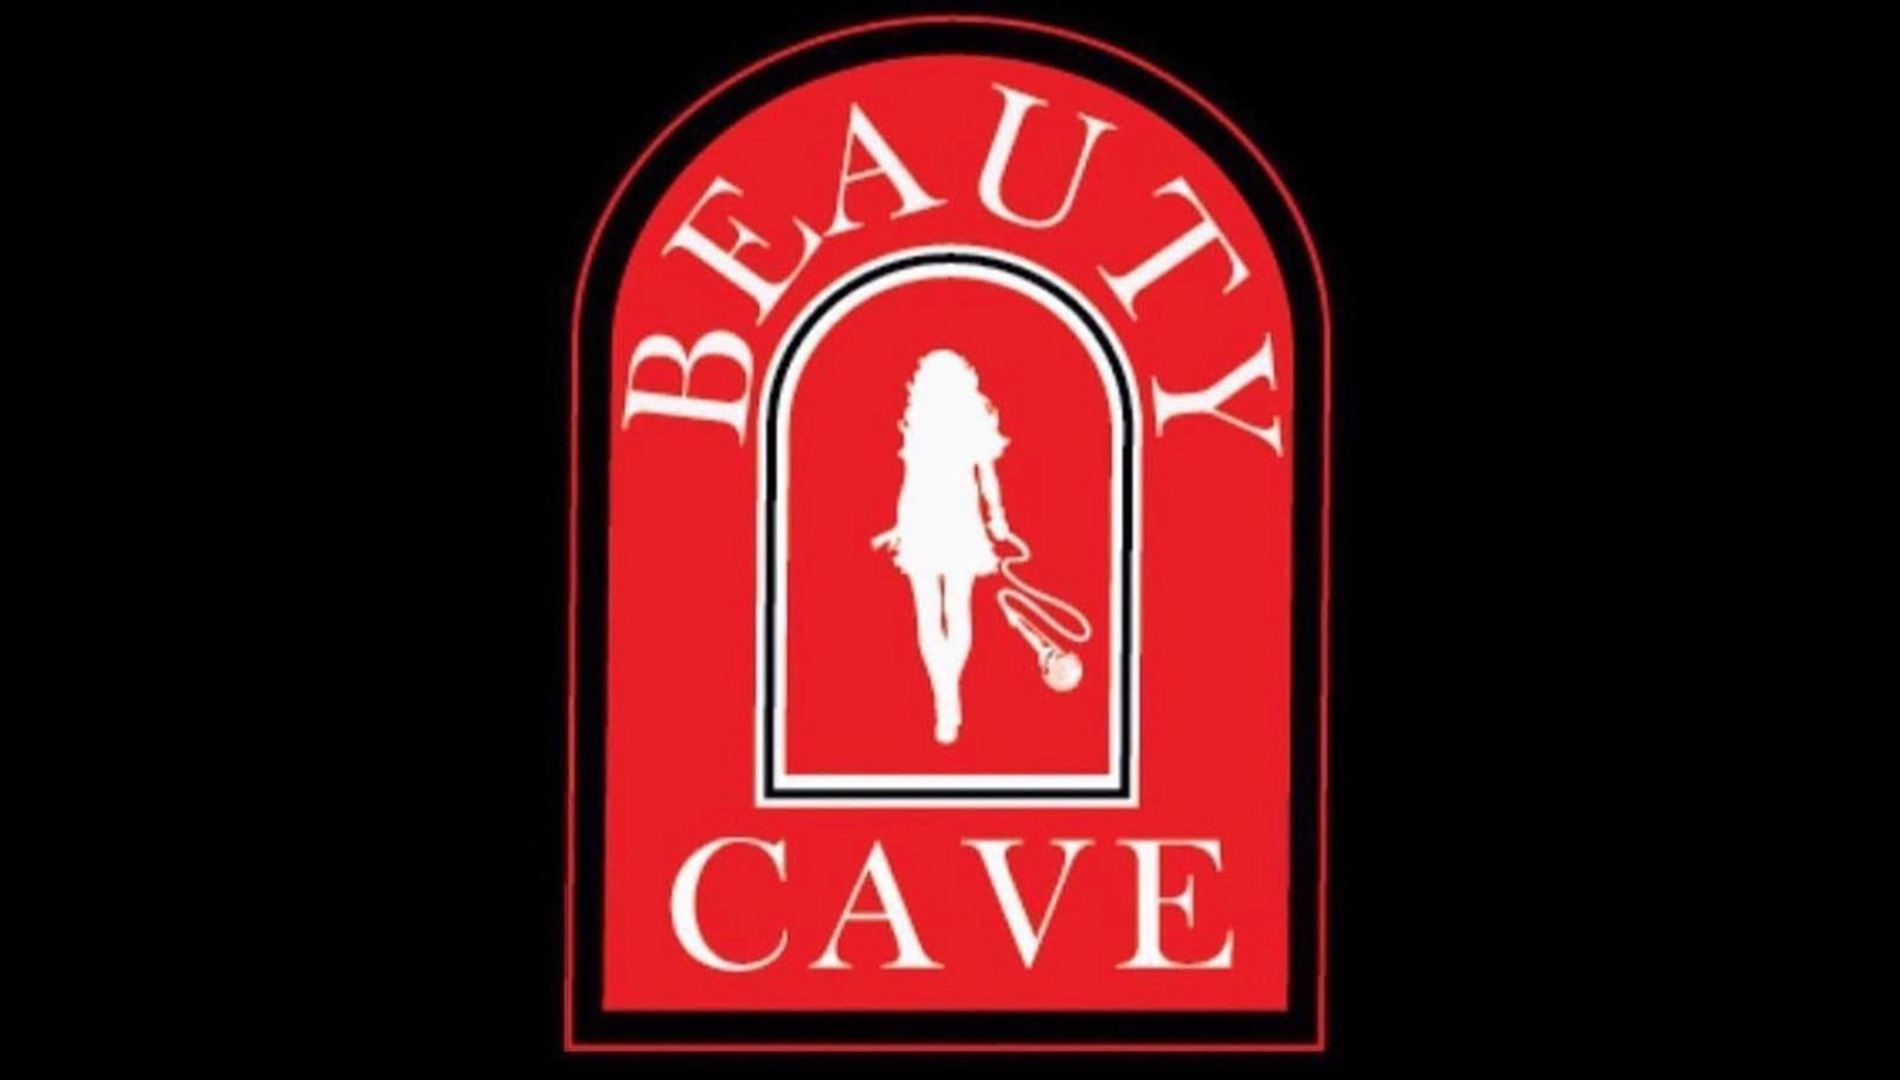 THe beauty cave